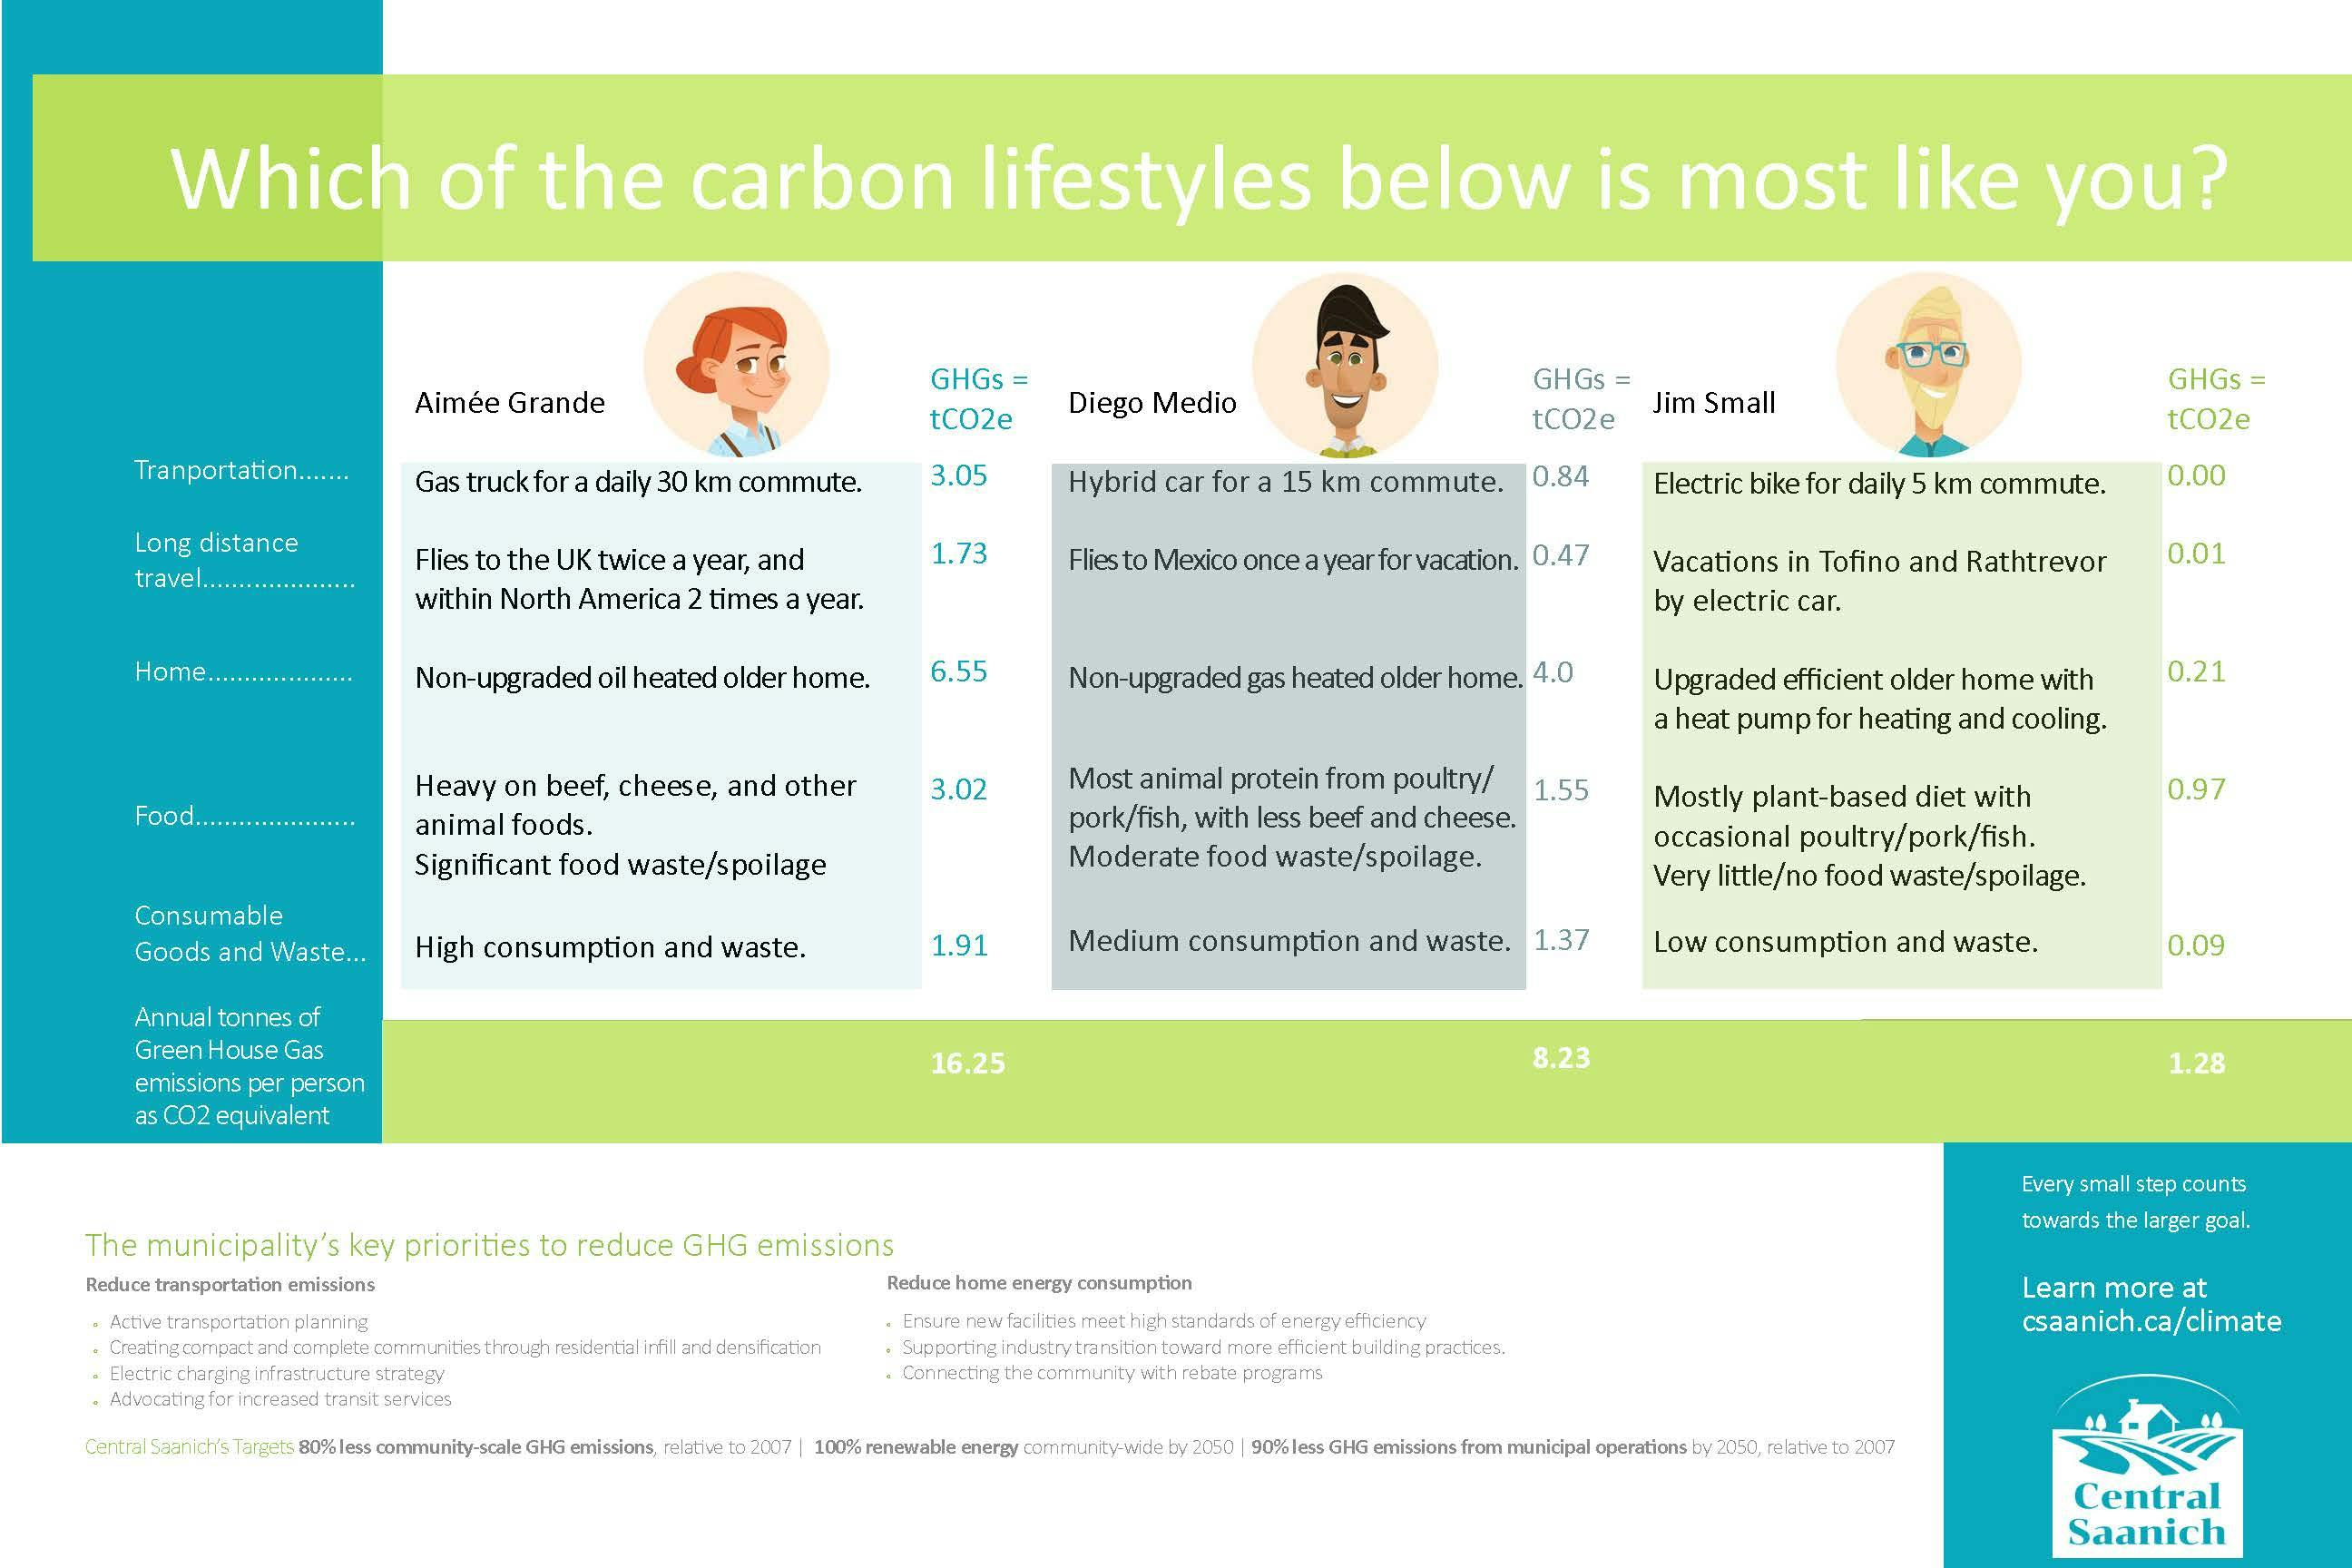 Carbon lifestyles poster